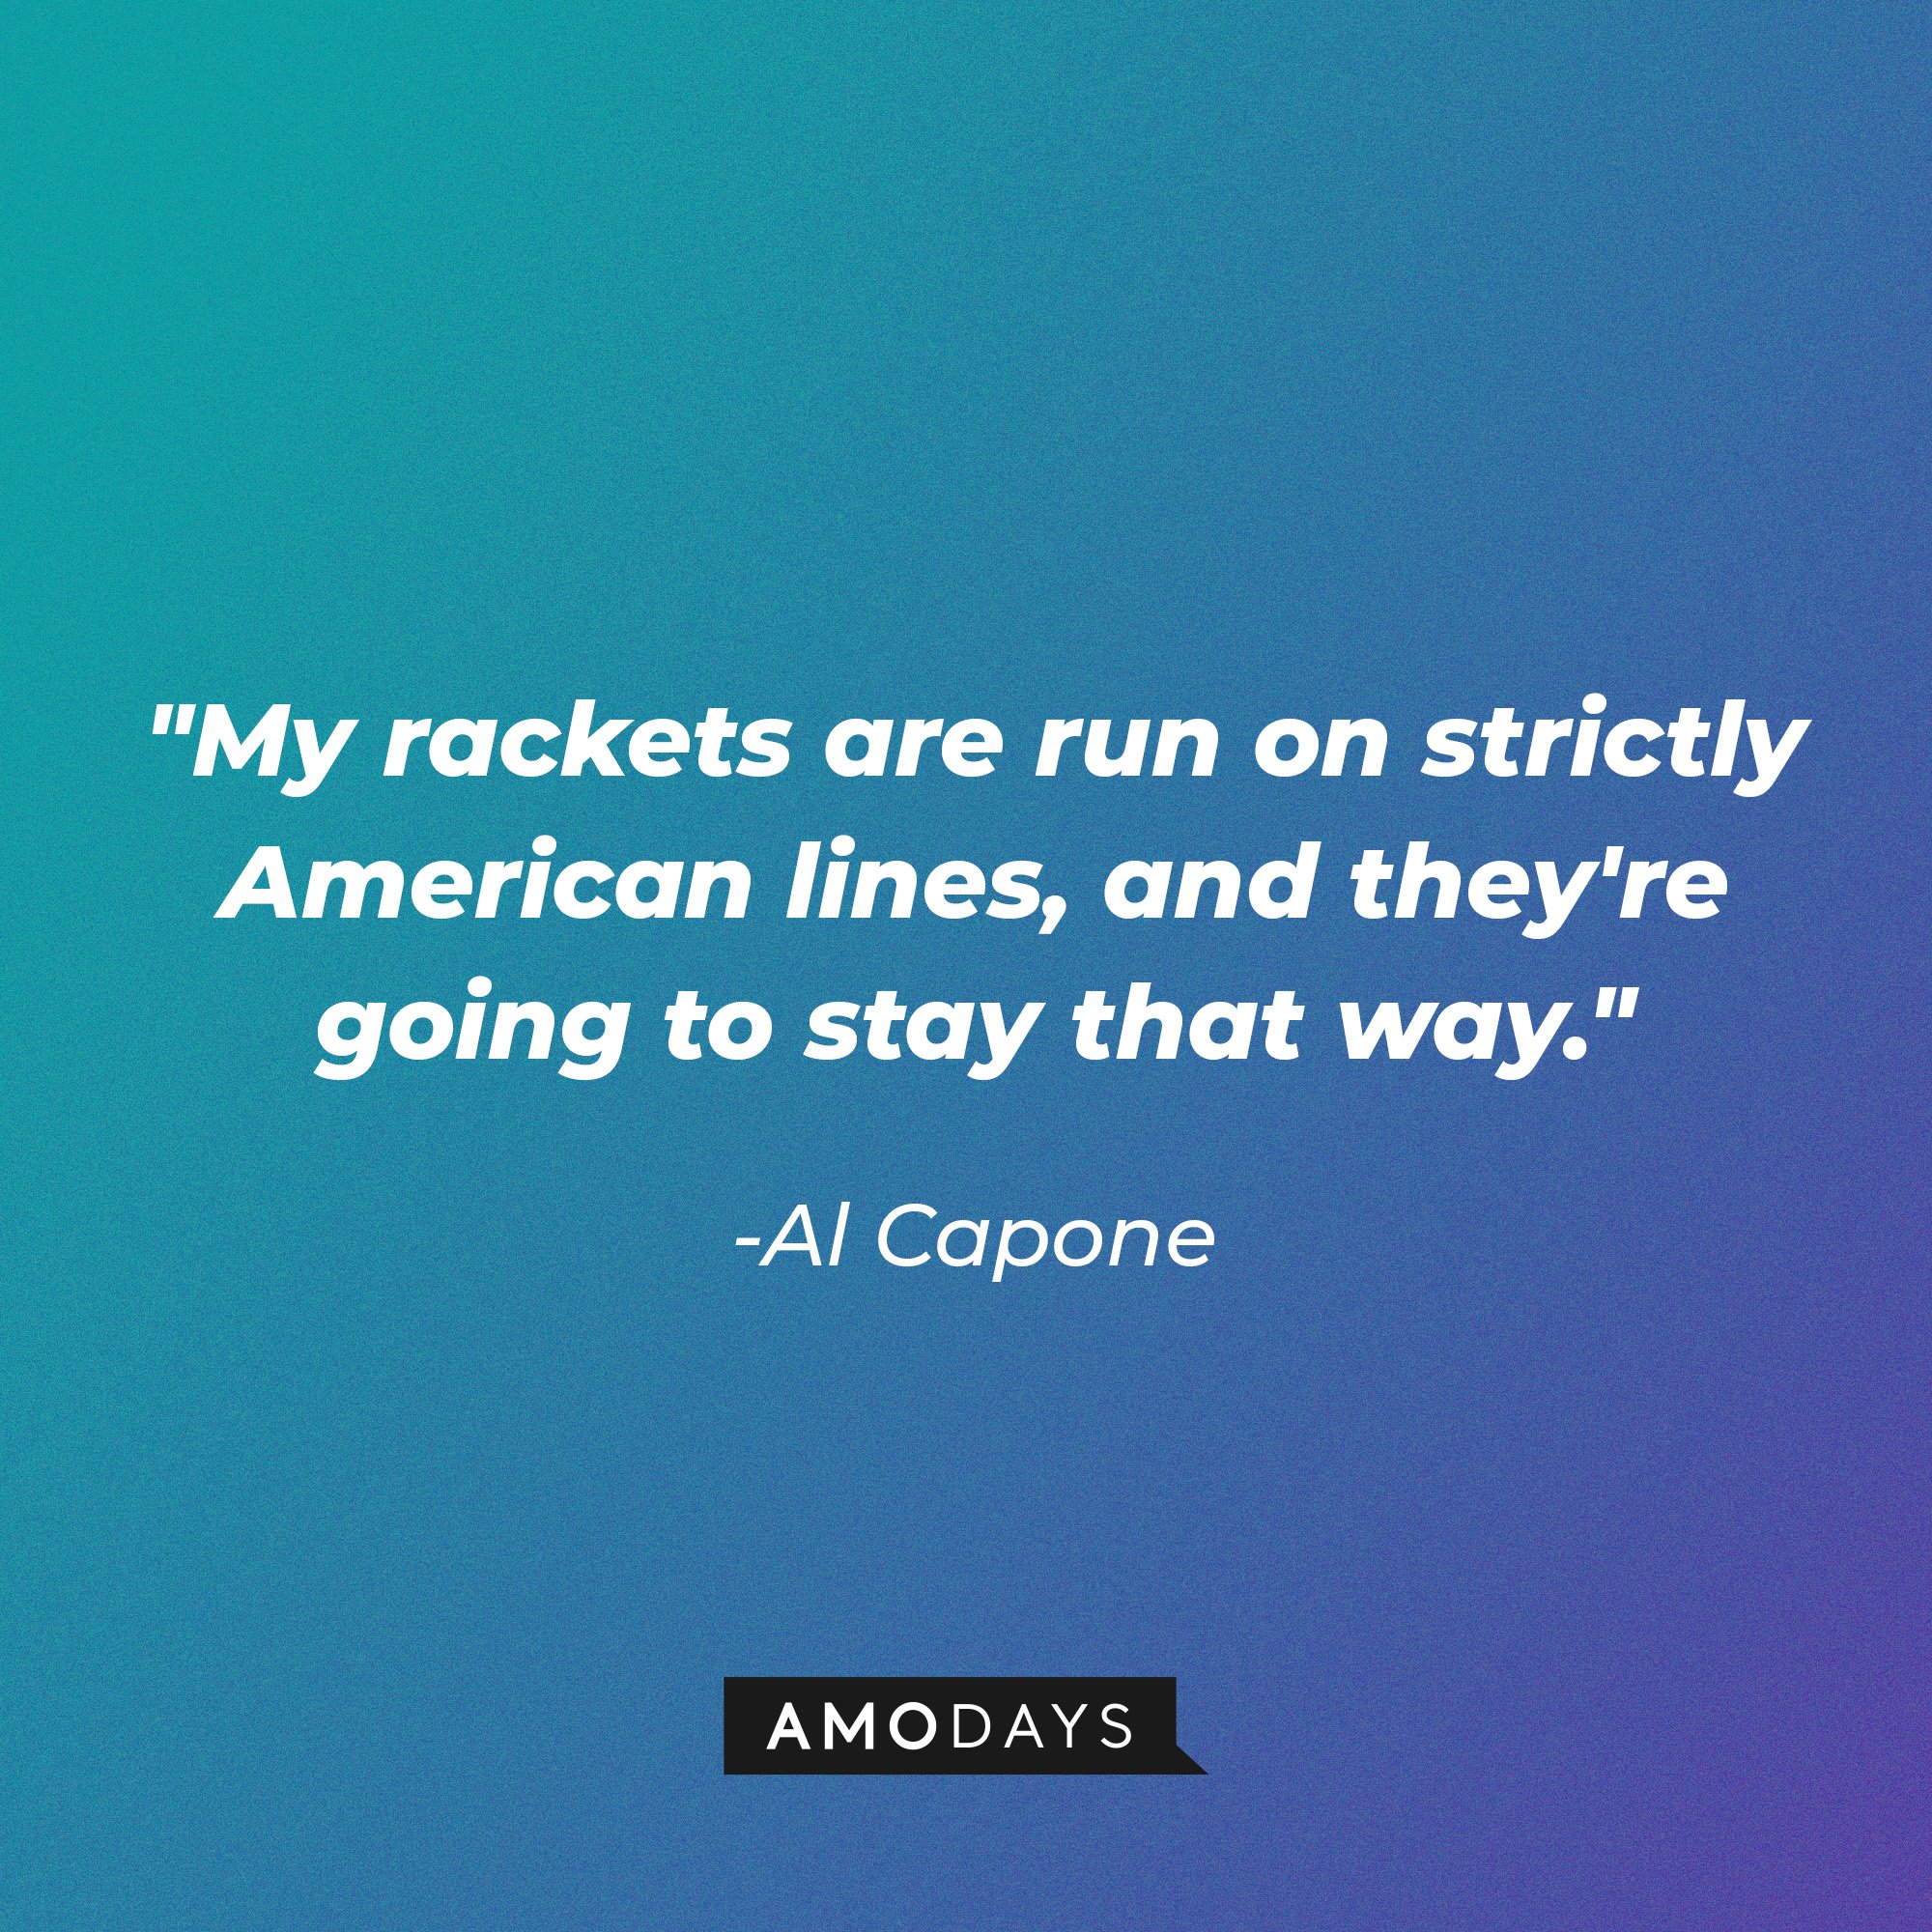 Al Capone’s quote: "My rackets are run on strictly American lines, and they're going to stay that way." | Image: AmoDays